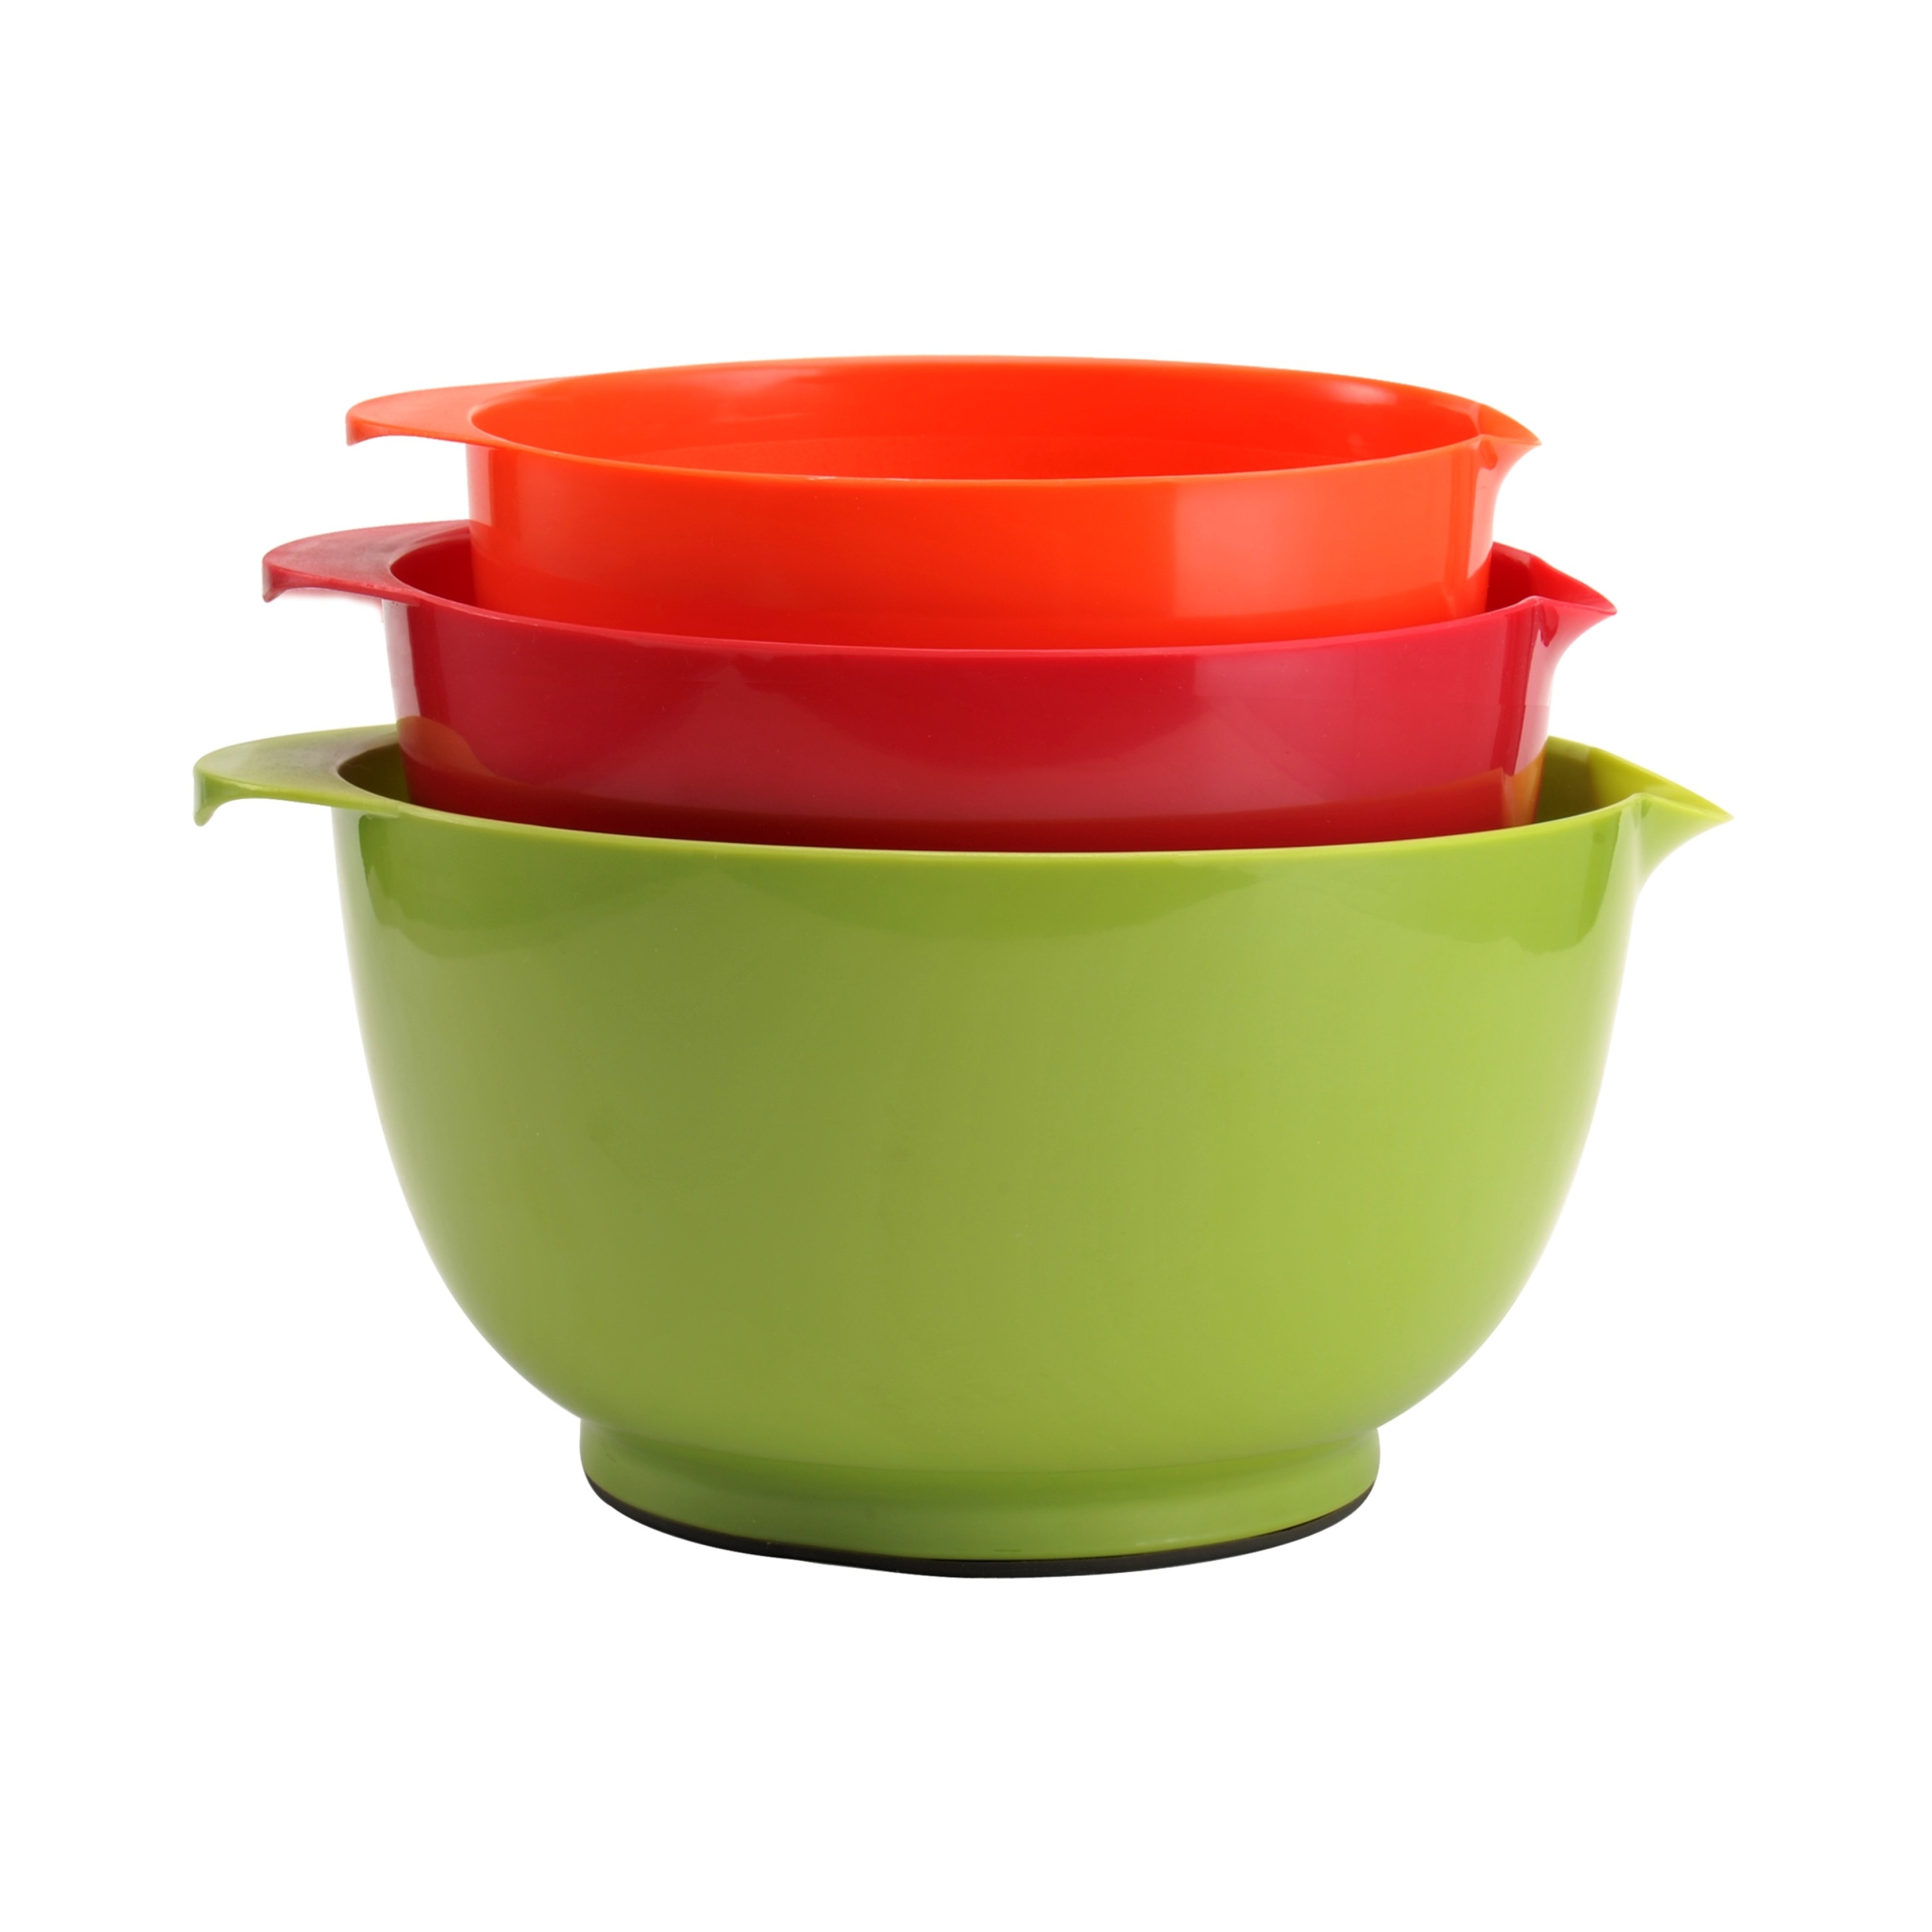 The green, red, and orange nesting bowls